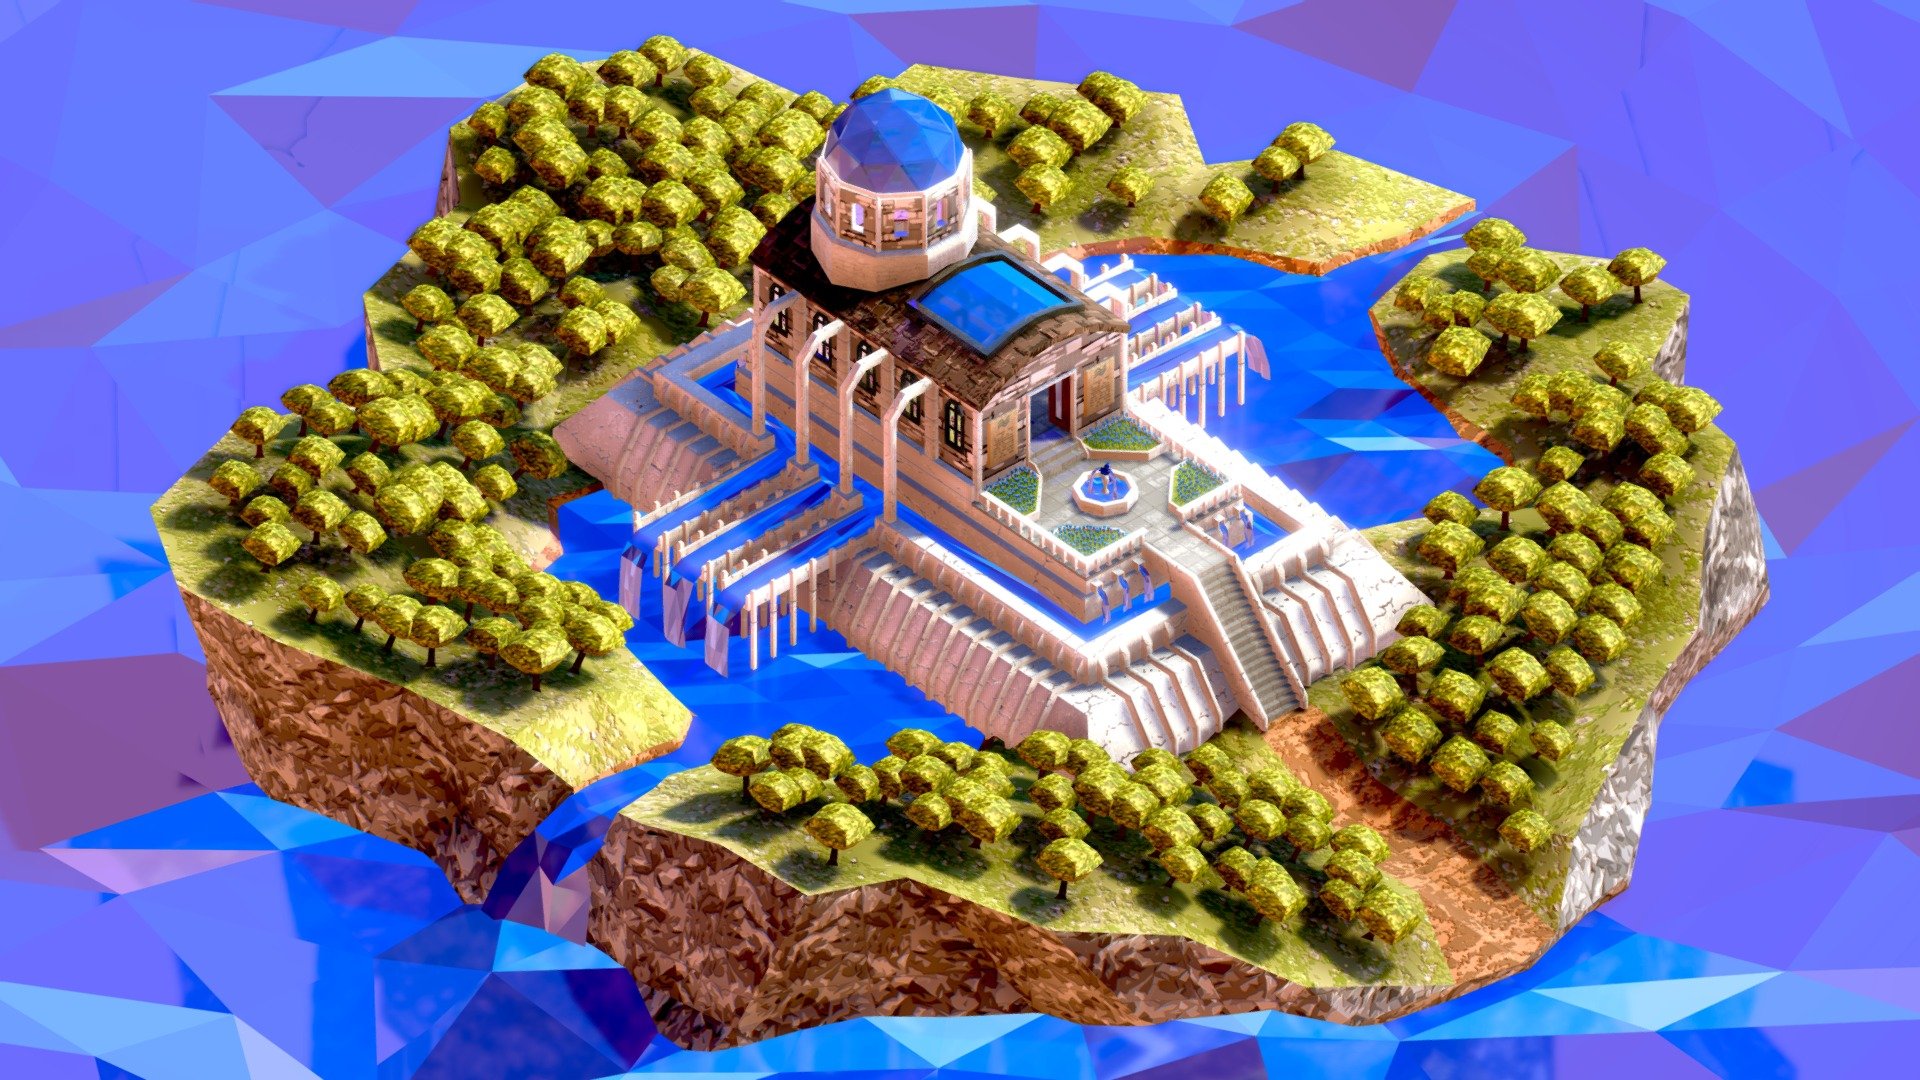 Made for Sketchfab January Challenge: Low Poly Fantasy Island
Textures used were taken from https://www.textures.com and modified in Photoshop
Everything was done in Blender 2.91
See rendered in Blender (Cycles) here: https://www.artstation.com/artwork/mDn9Ae - Water Temple Island - 3D model by Rafael Rodrigues (@RafaelBR873D) 3d model